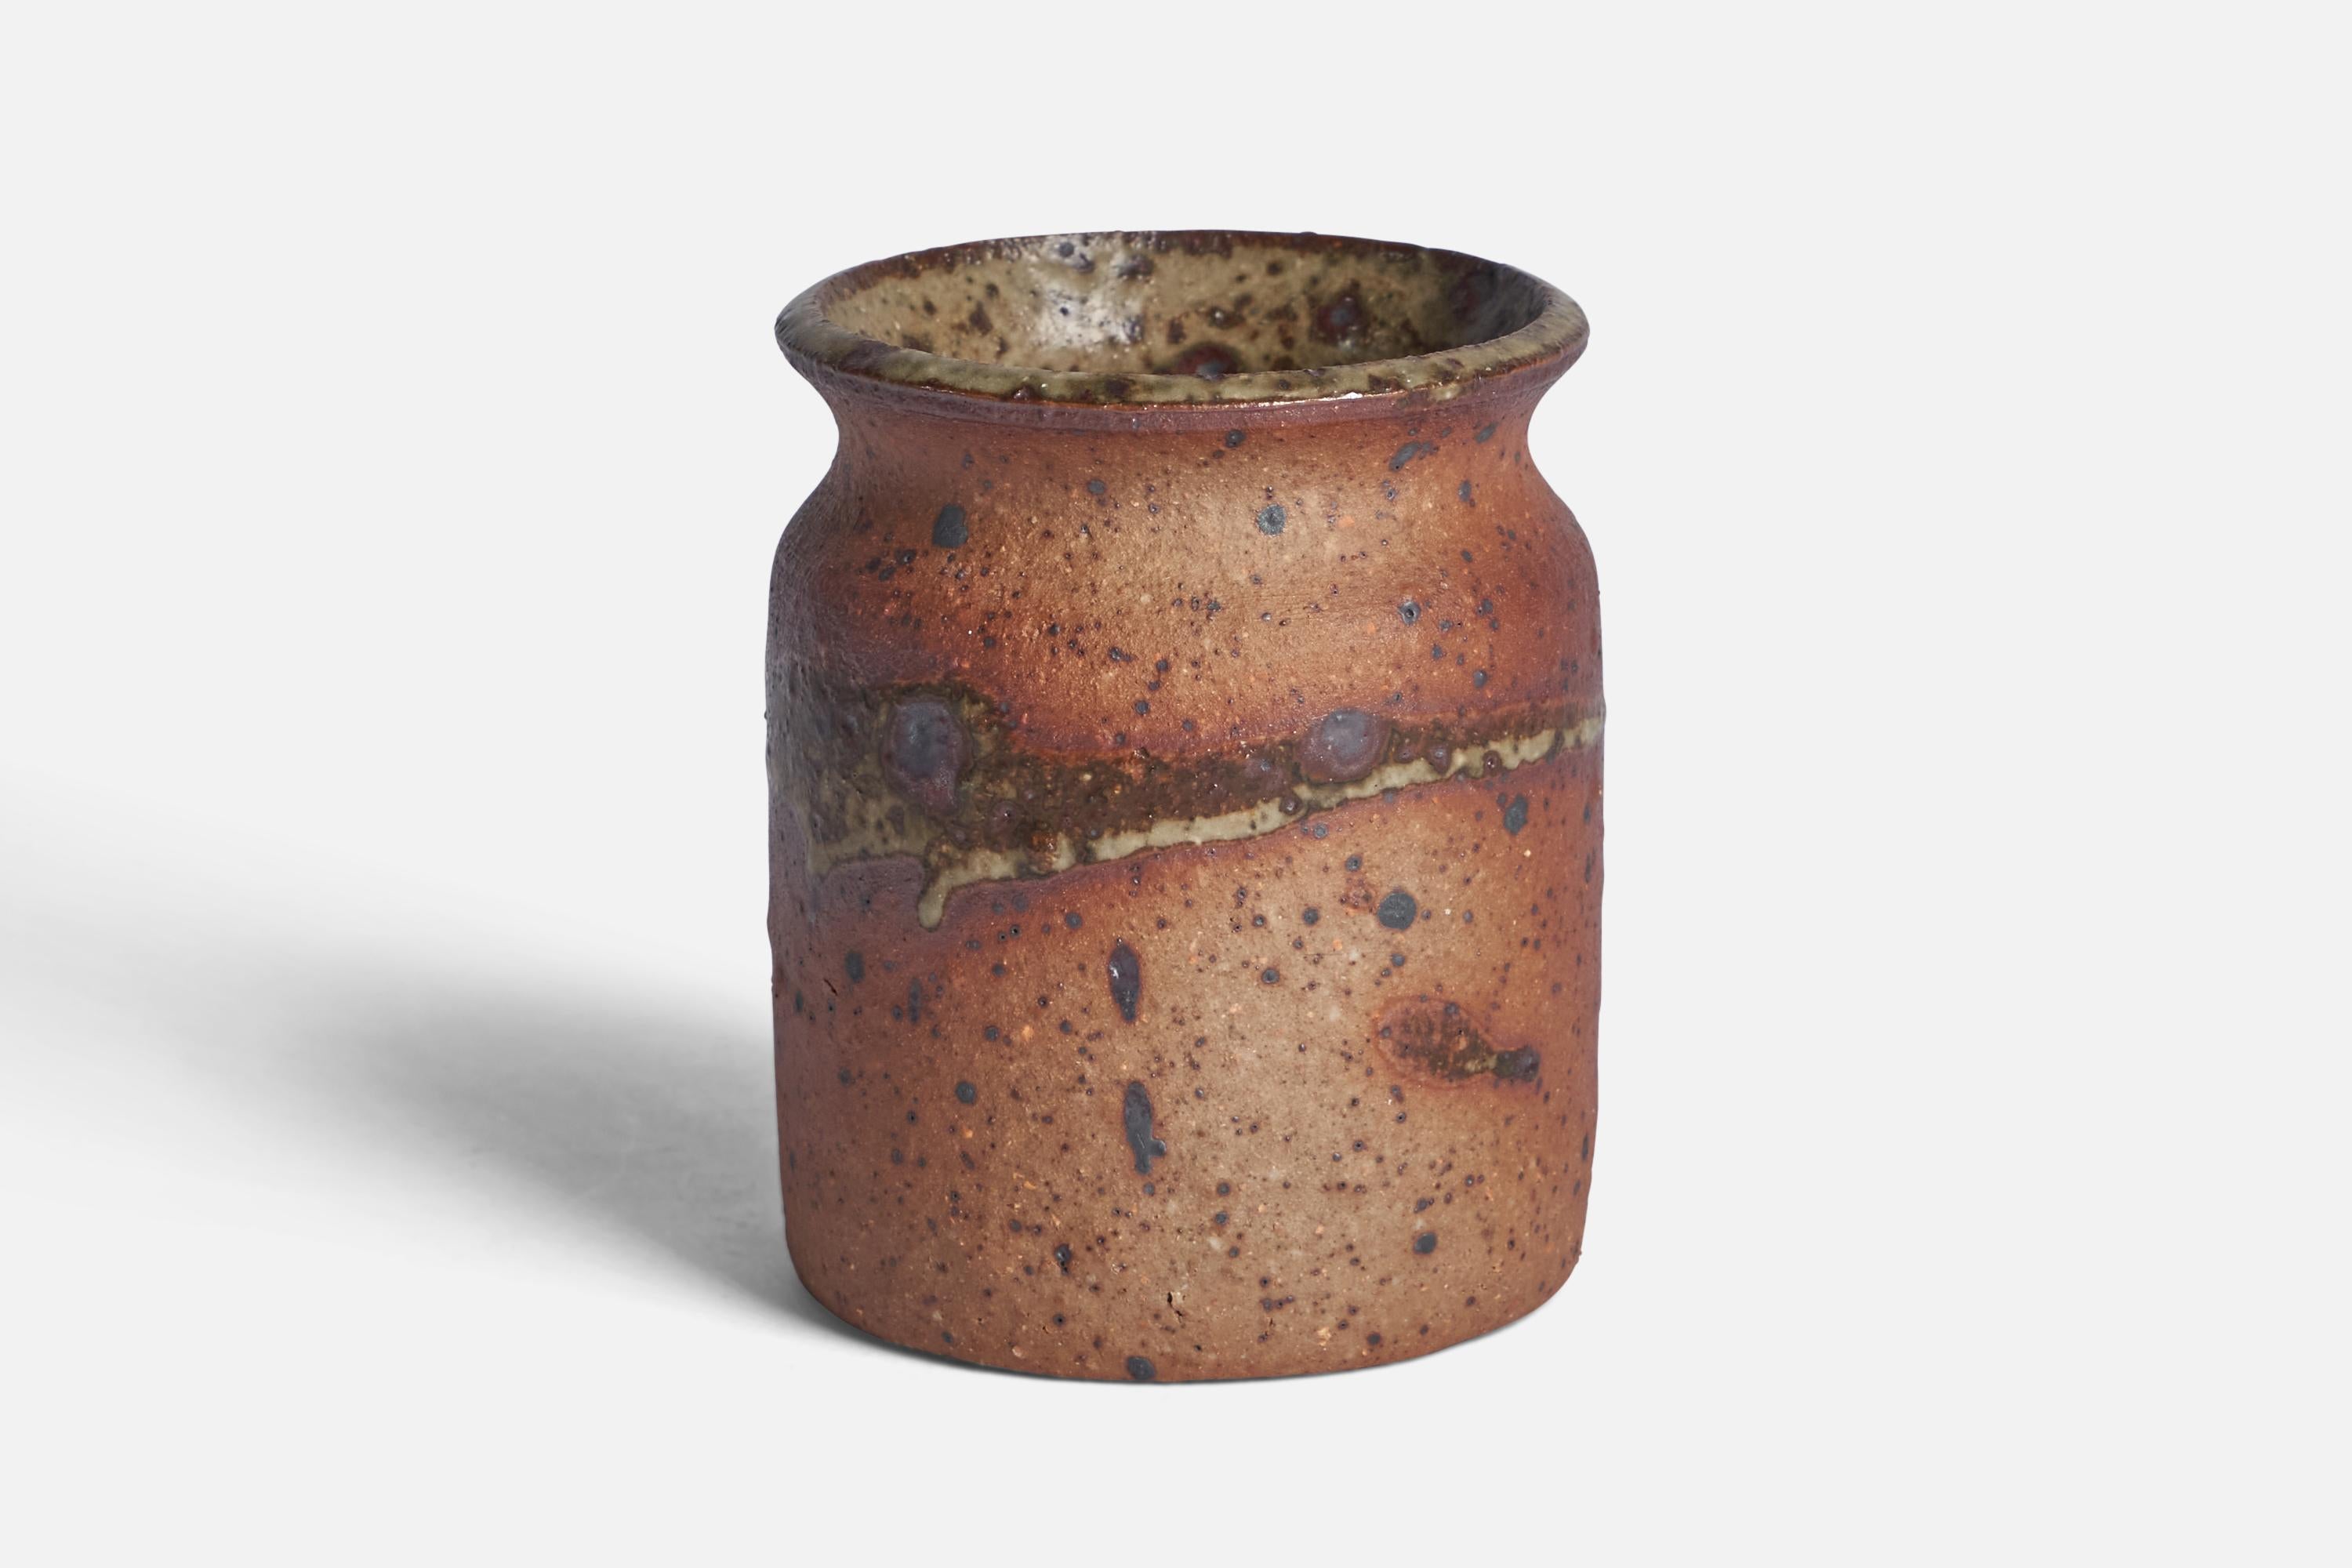 A small stoneware vase designed and produced by Rolf Palm, Mölle, Sweden, c. 1950s.